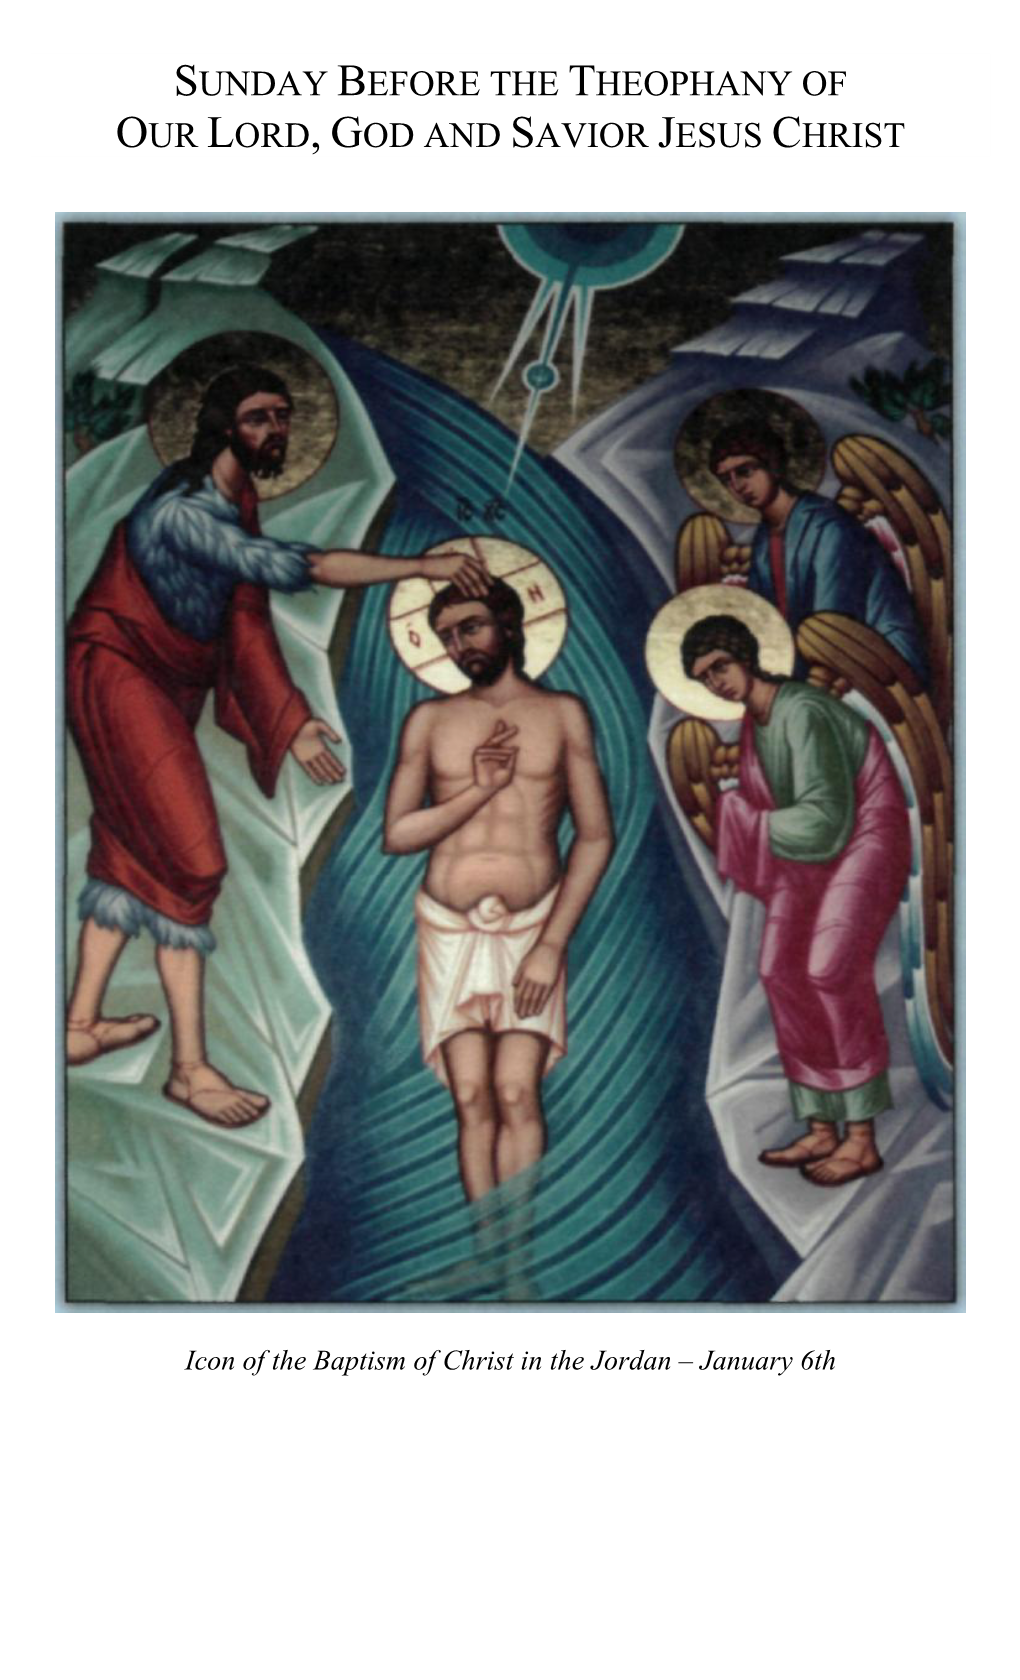 Sunday Before the Theophany of Our Lord, God and Savior Jesus Christ